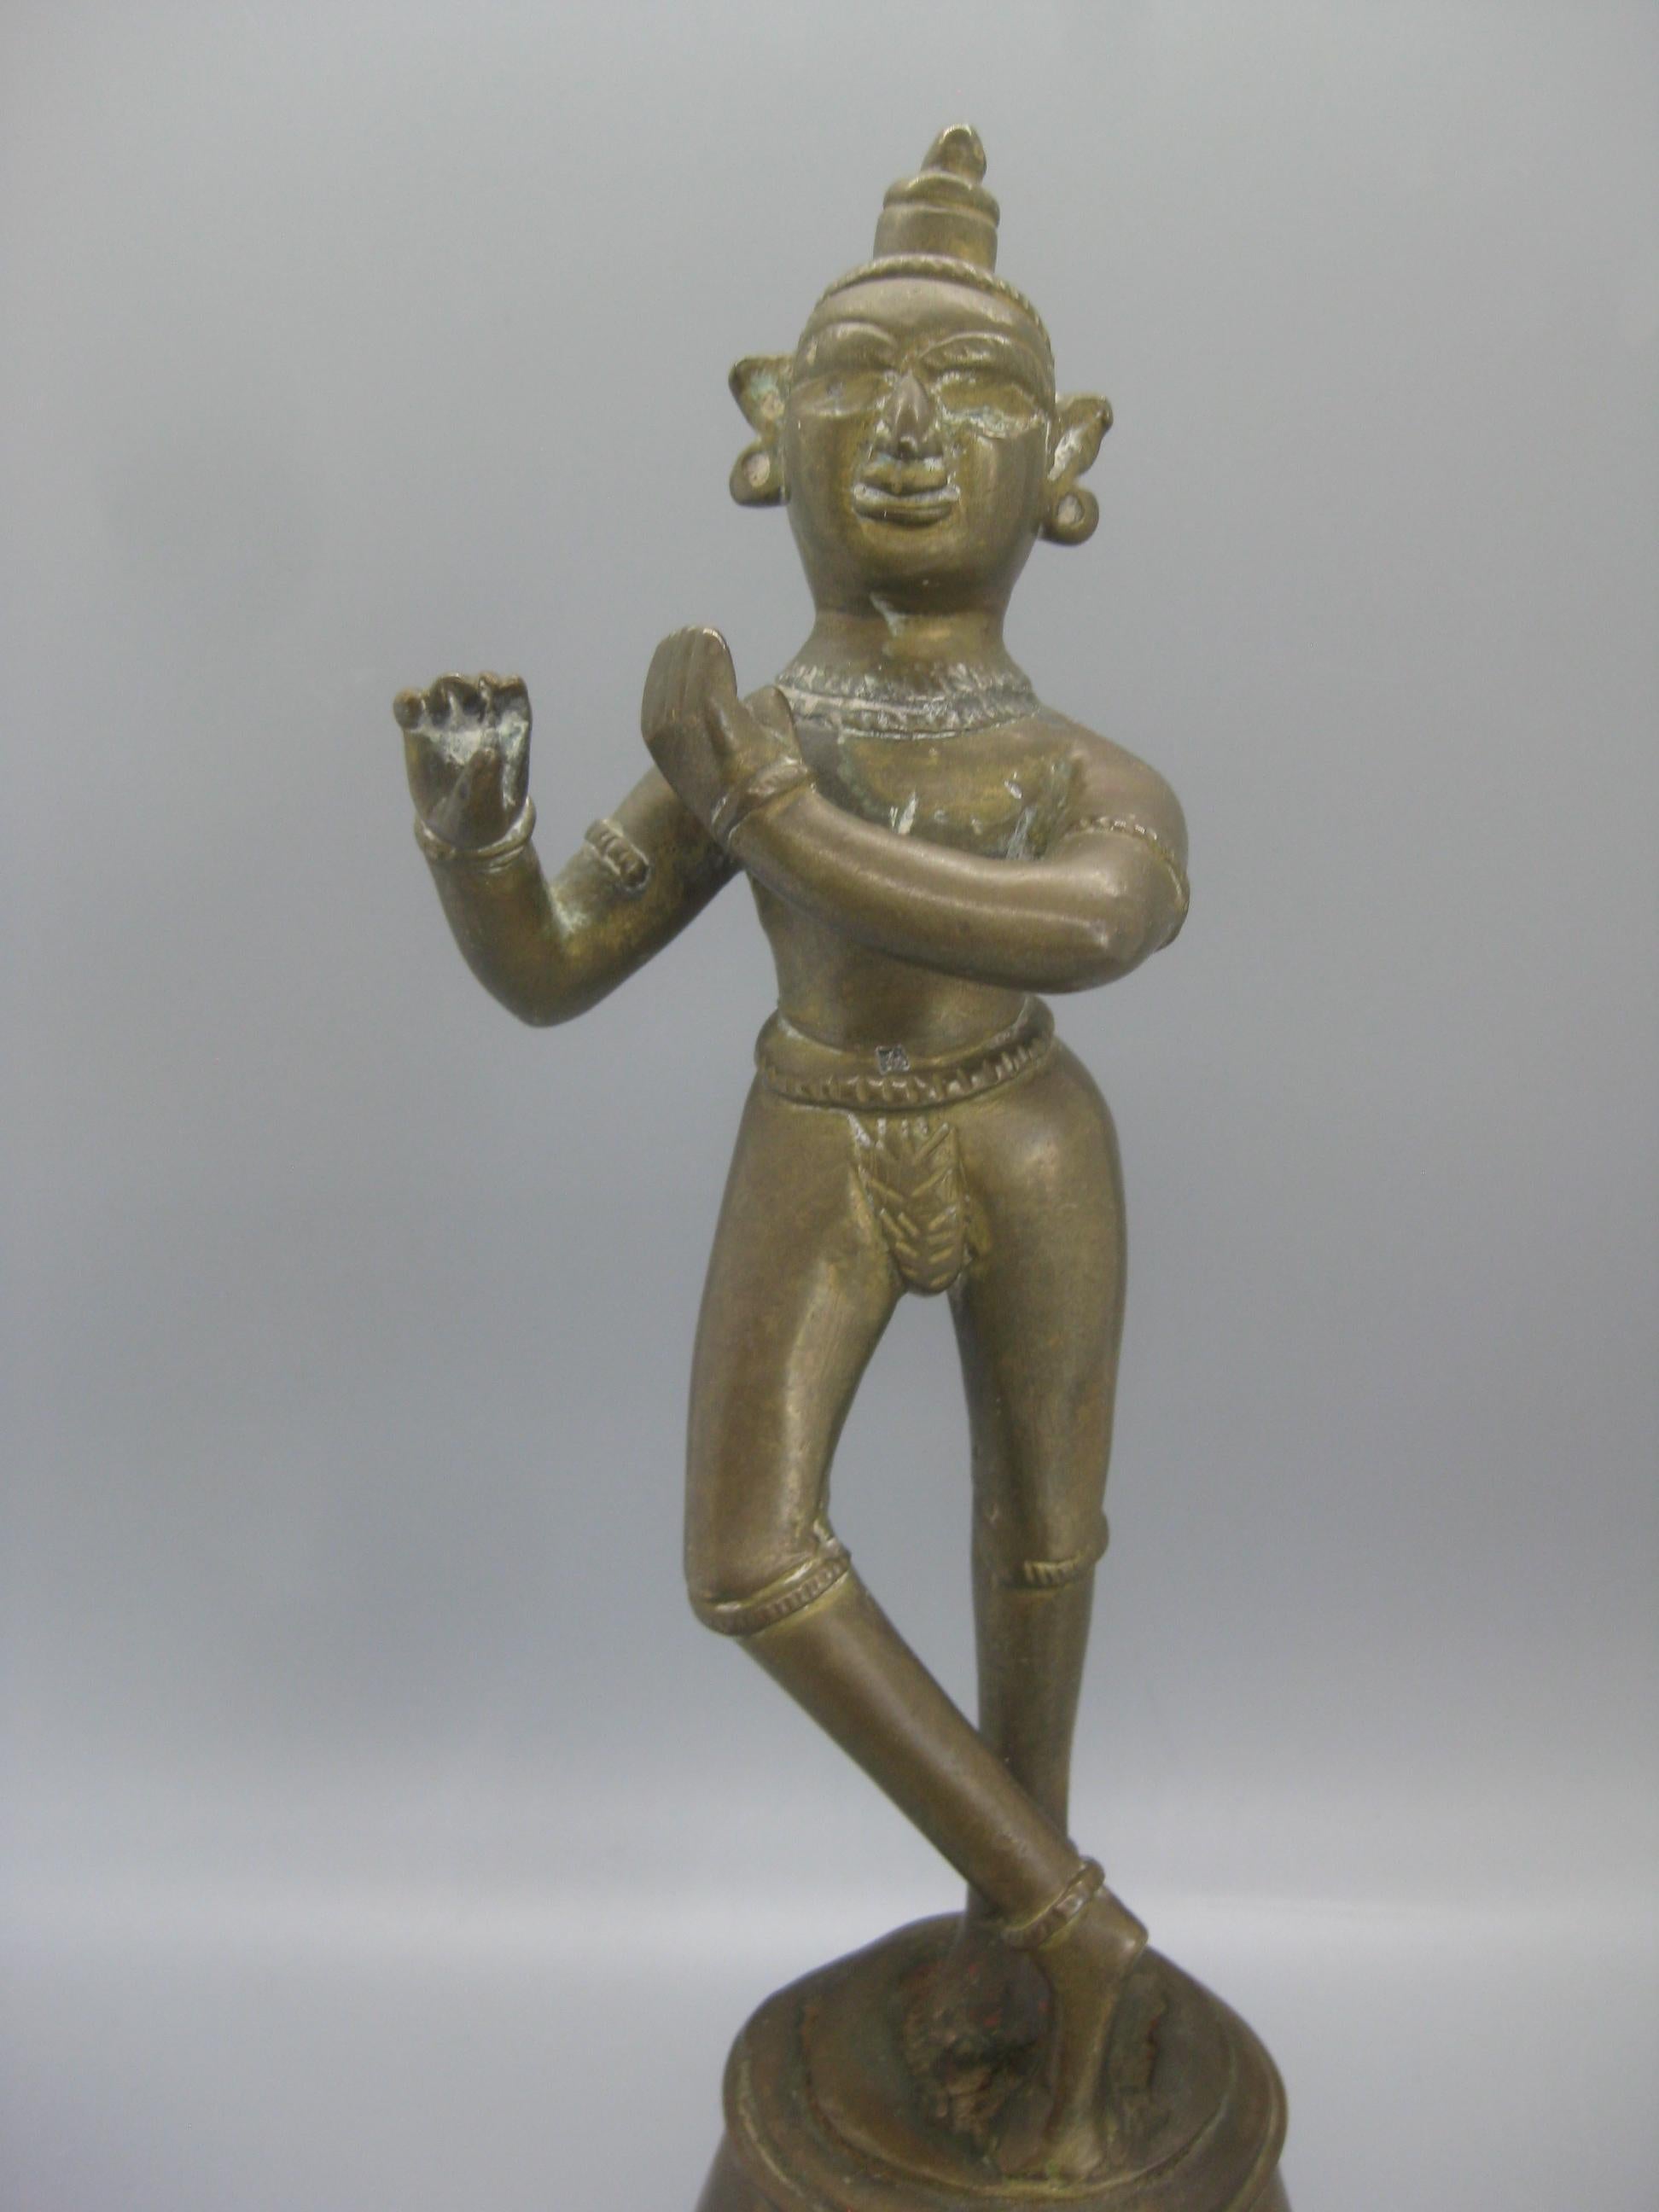 Very unique antique India Hindu Lord Krishna standing statue sculpture. Made of brass and has a wonderful patina. This is a very old piece. In very nice original condition with no damage. Measures: approx. 9 3/4